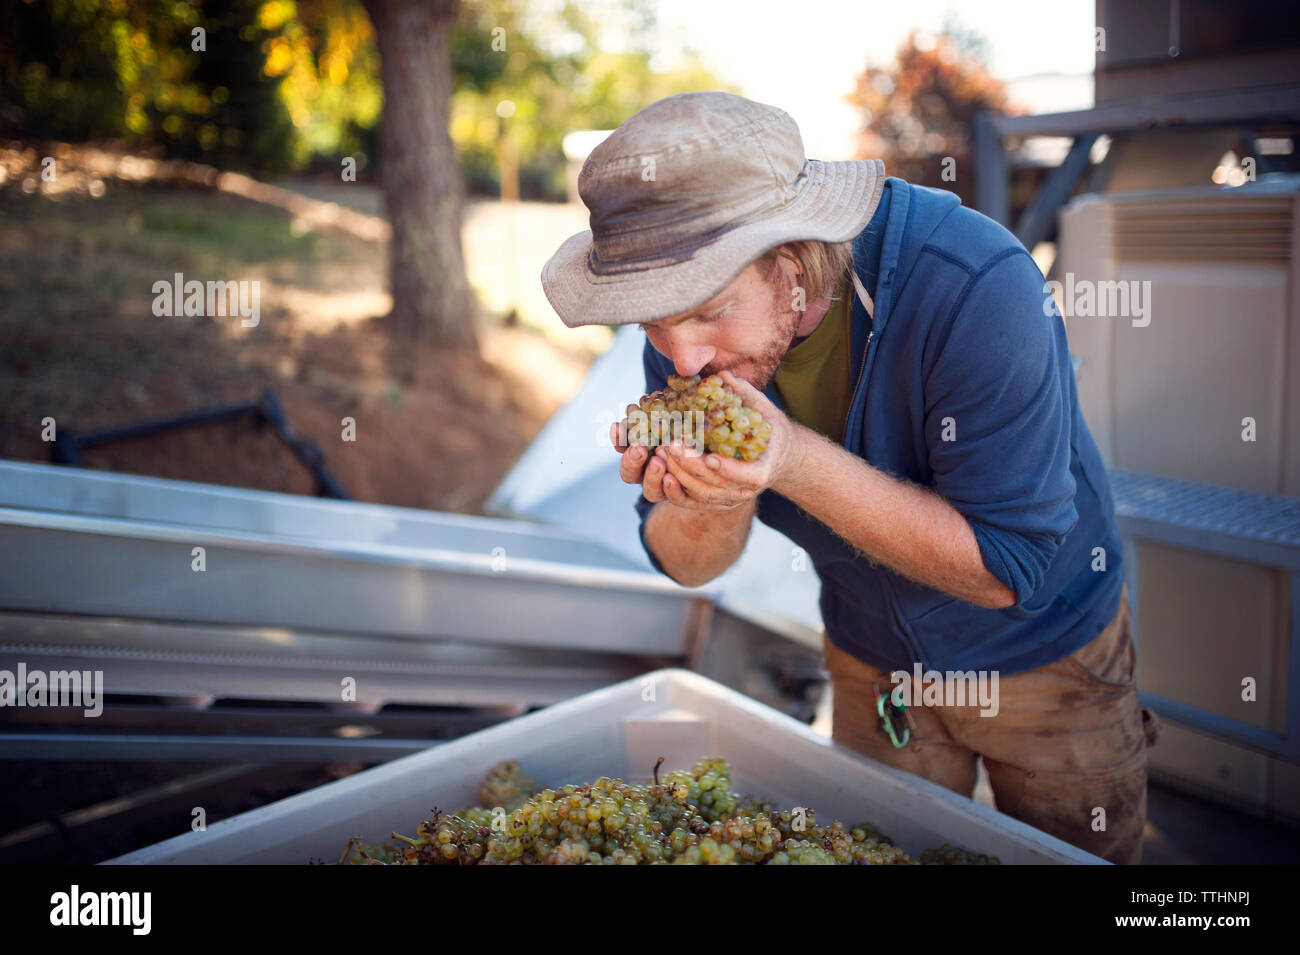 Male farmer checking grapes in container Stock Photo